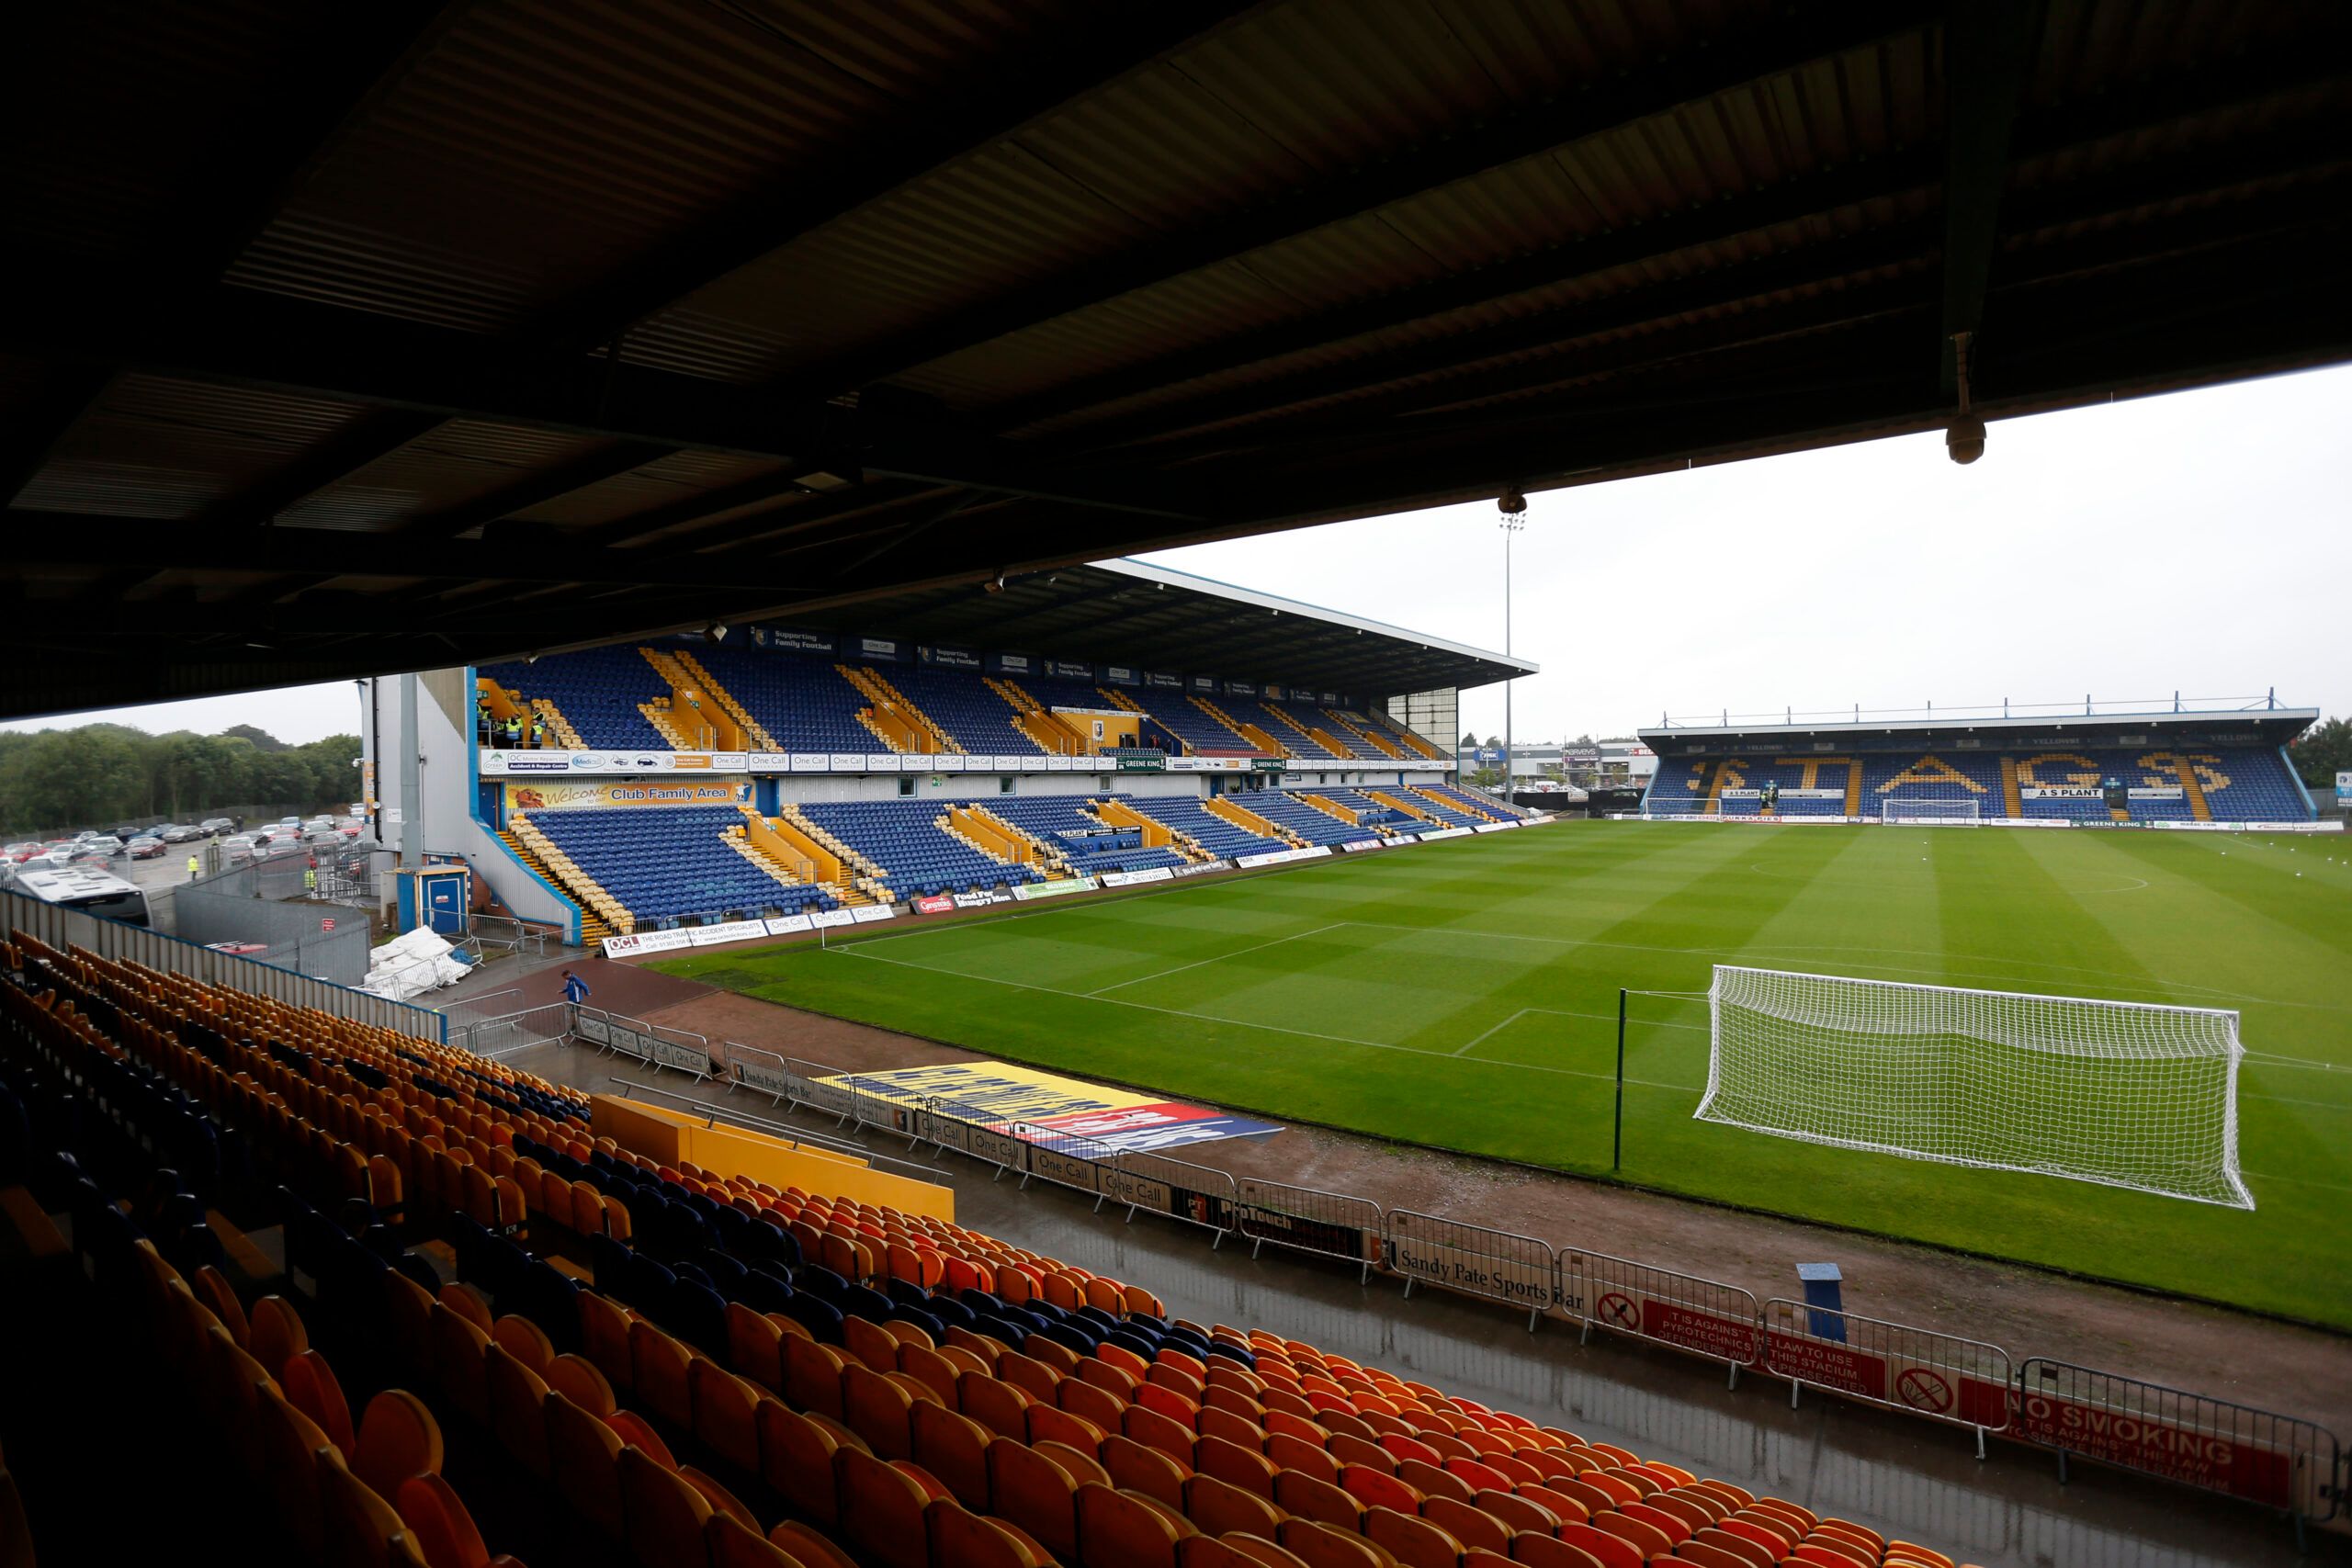 Britain Football Soccer - Mansfield Town v Cambridge United - Sky Bet League Two - One Call Stadium - 3/9/16
General view of the One Call Stadium
Mandatory Credit: Action Images / Ed Sykes
Livepic
EDITORIAL USE ONLY.